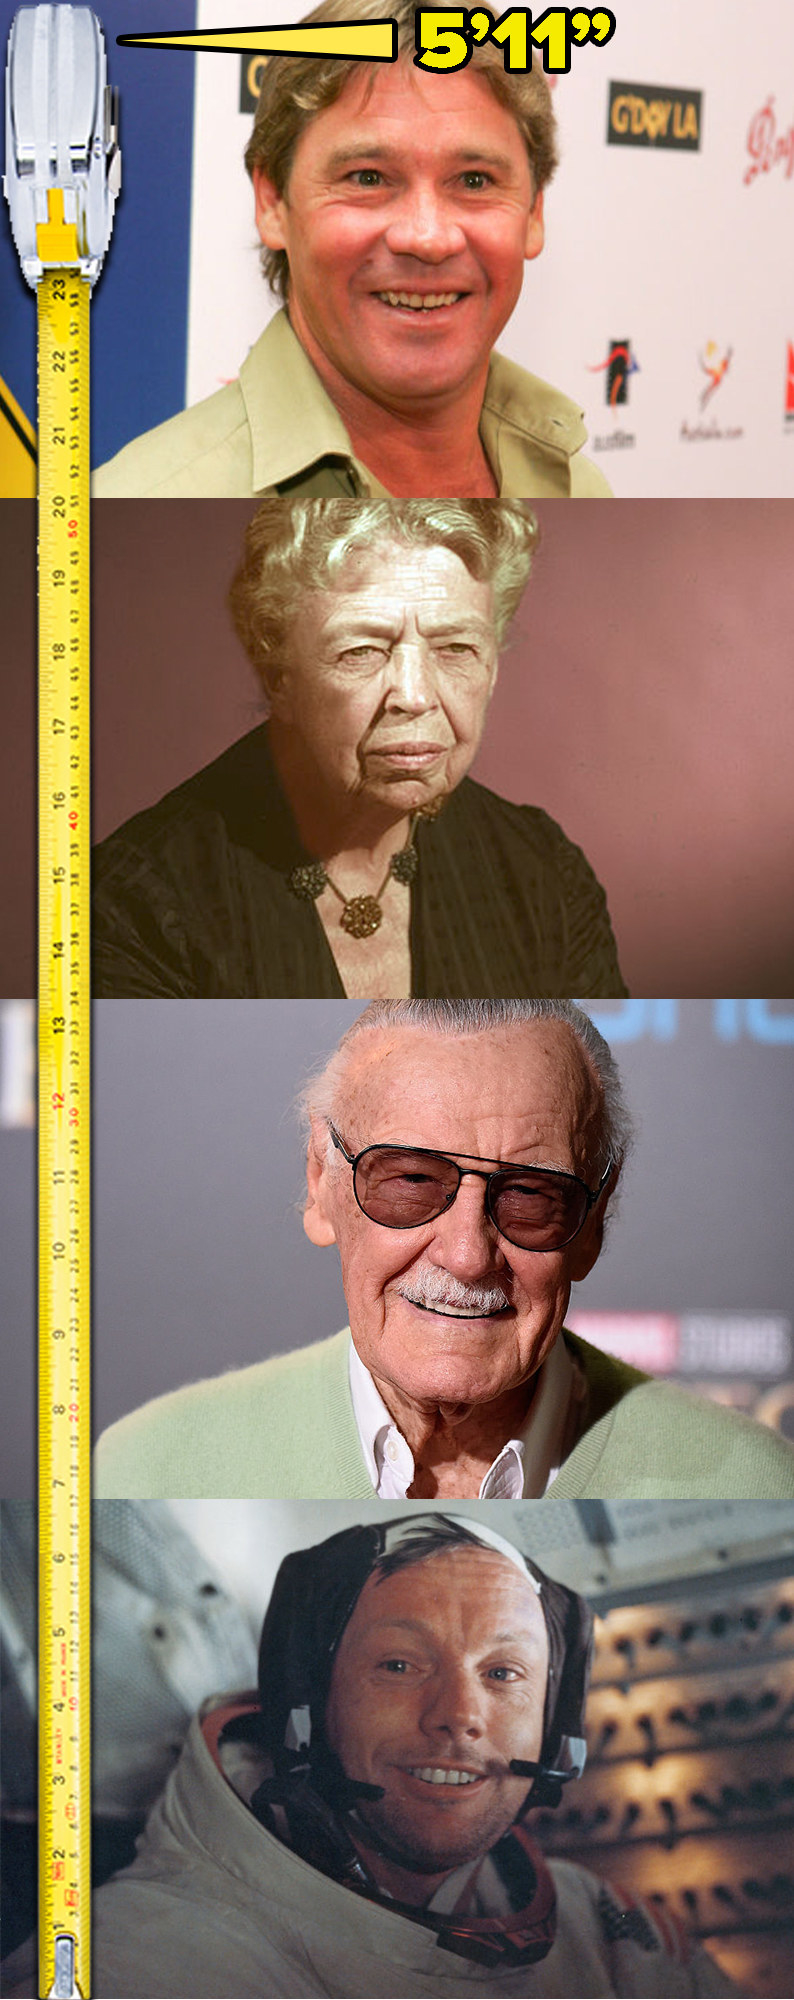 Stacked images of Steve Irwin, Eleanor Roosevelt, Stan Lee, and Neil Armstrong next to a measuring tape